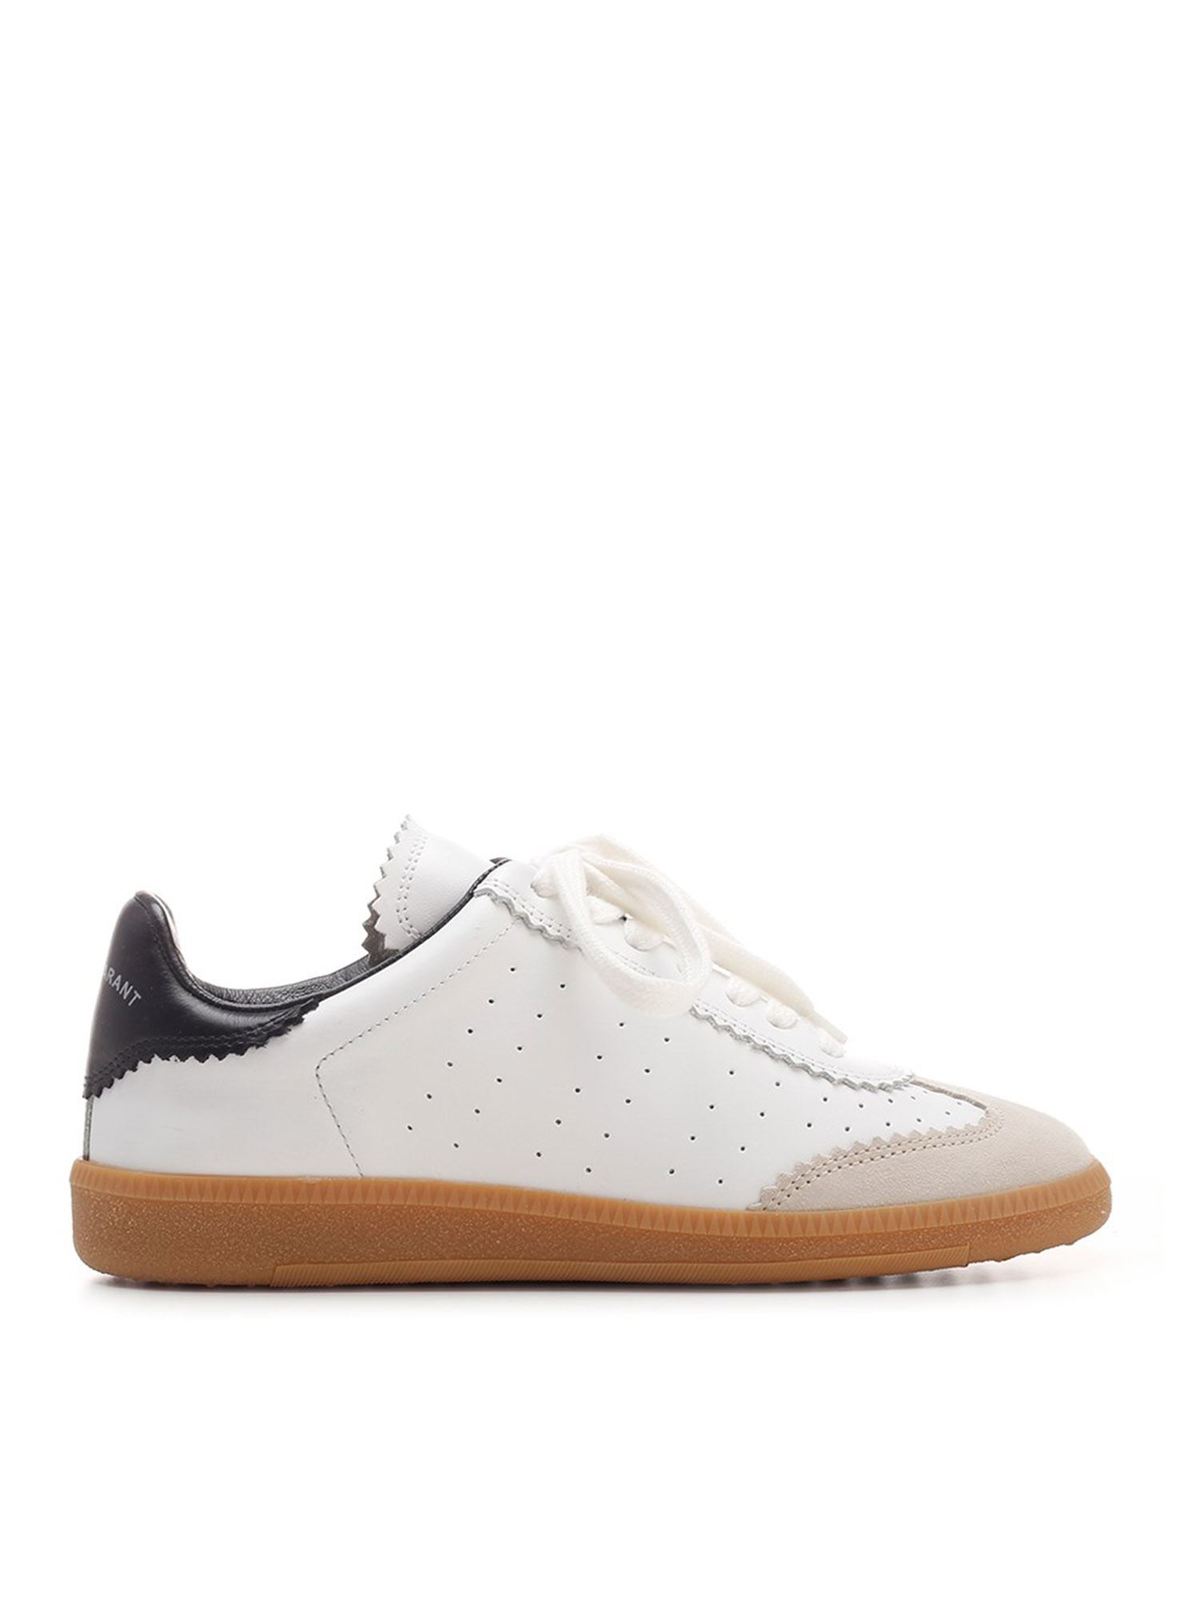 Trainers Isabel Marant - Bryce sneakers in white and black ...